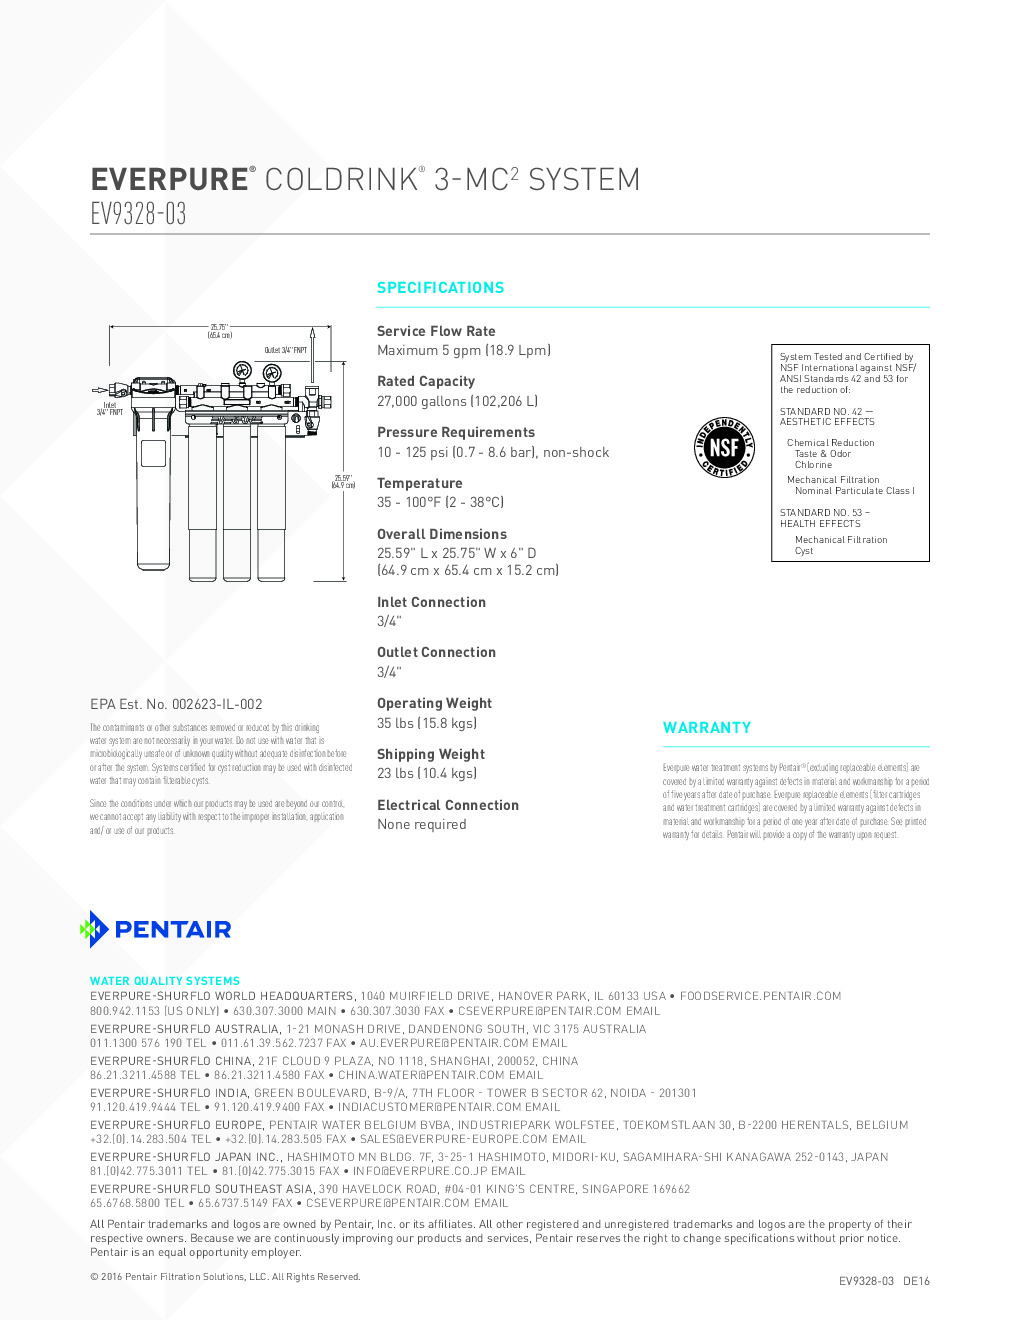 Everpure EV932803 for Fountain / Beverage Machines Water Filtration System